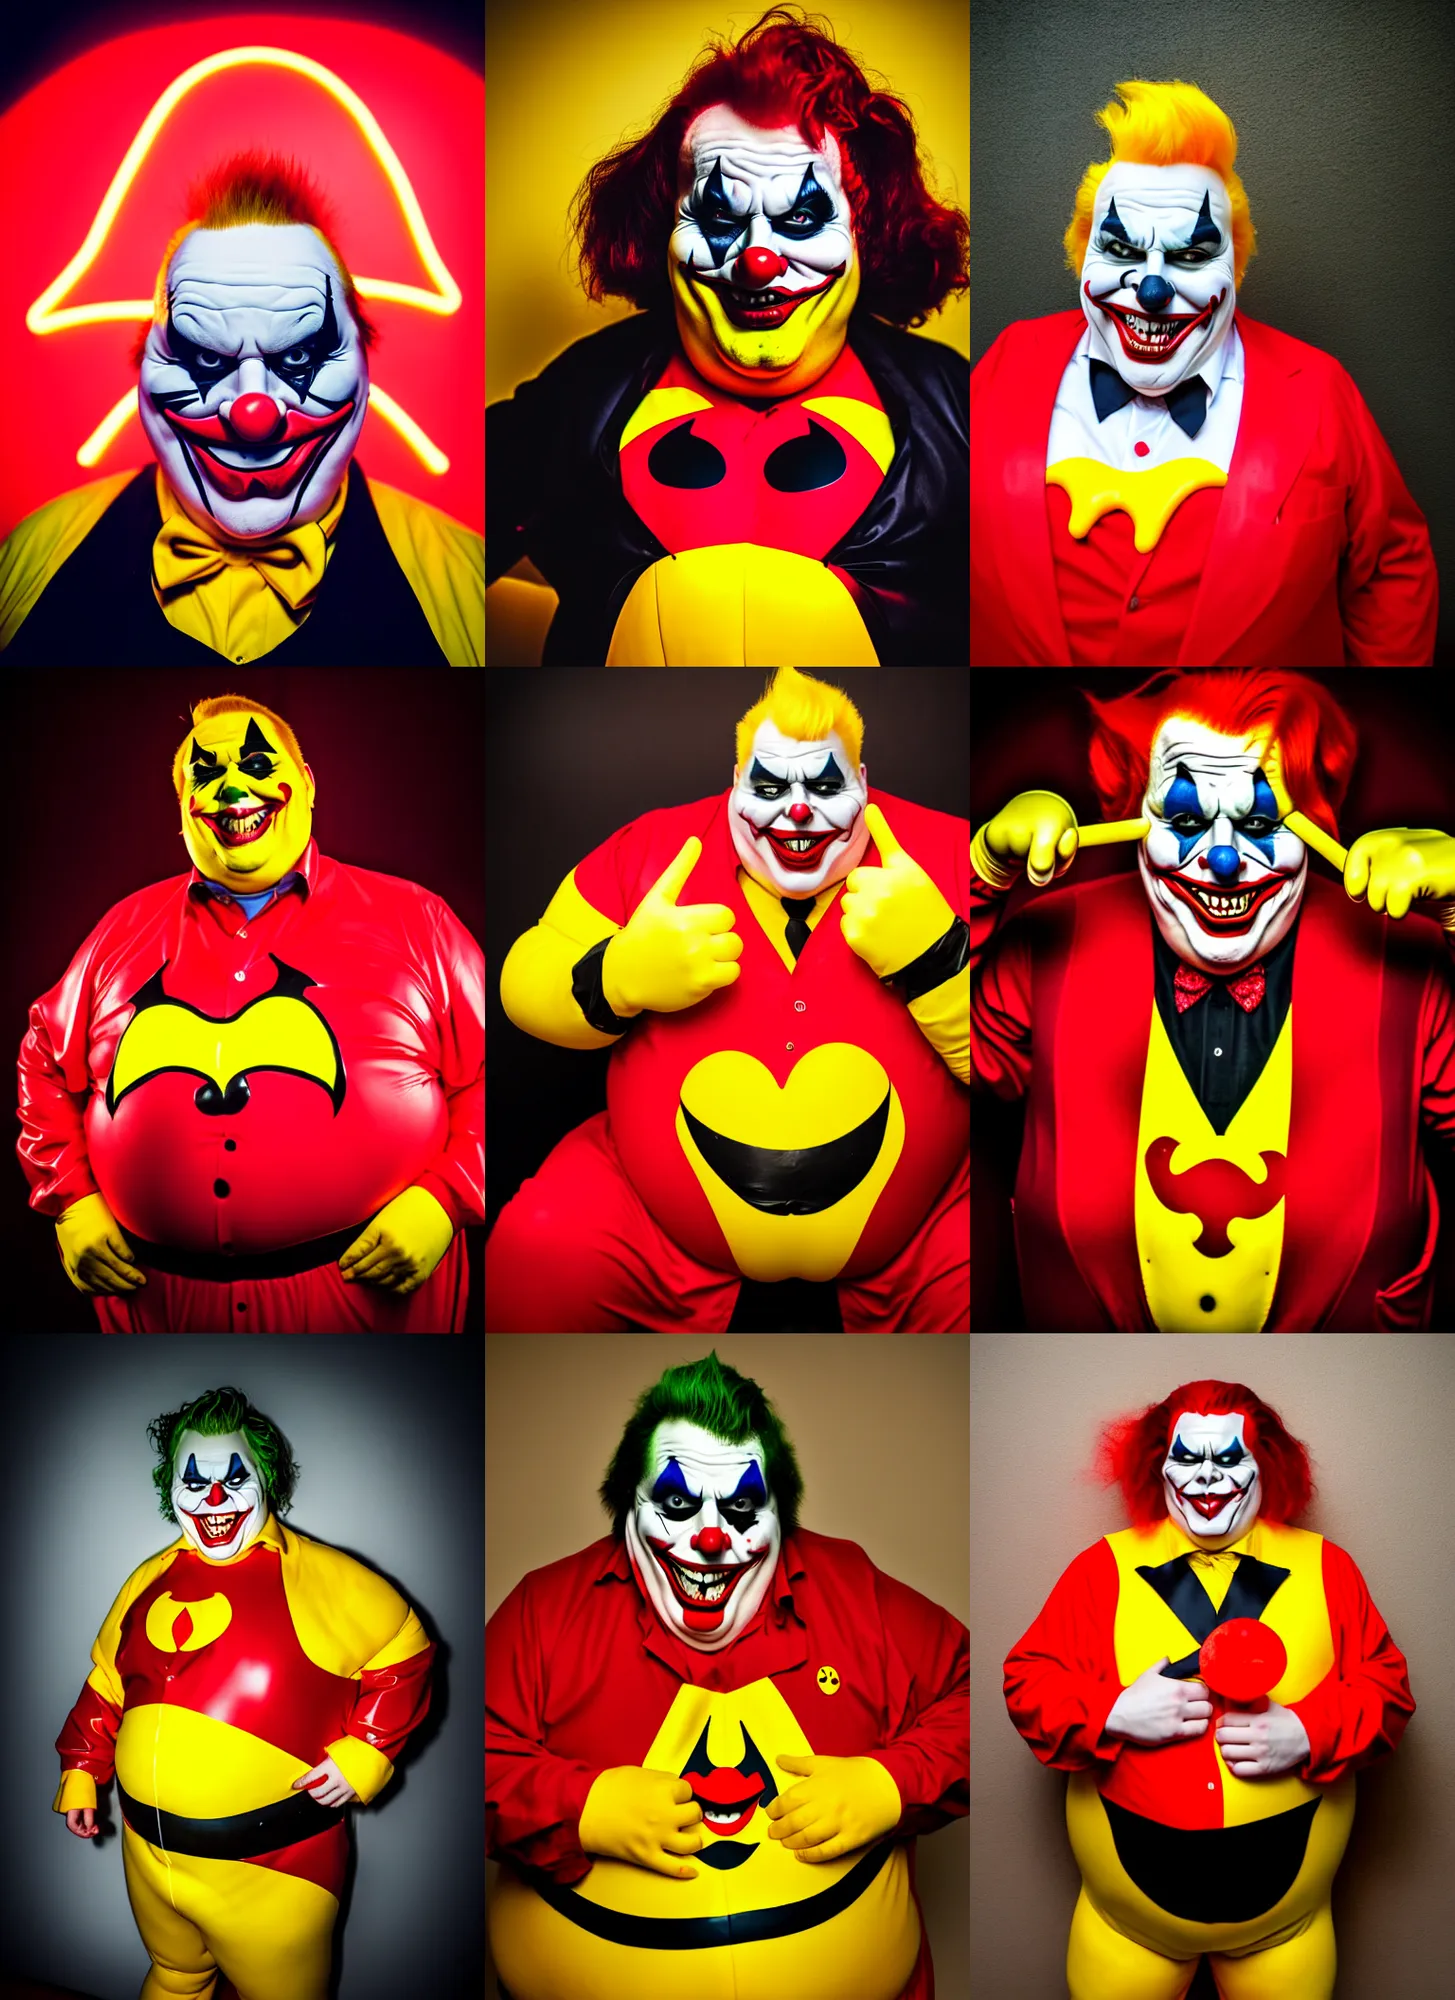 Prompt: wide angle lens portrait photography of a very fat sinister looking joker dressed in yellow and red rubber latex Ronald Macdonalds costume, red hair, a Macdonalds logo on his chest, lit by neon lighting